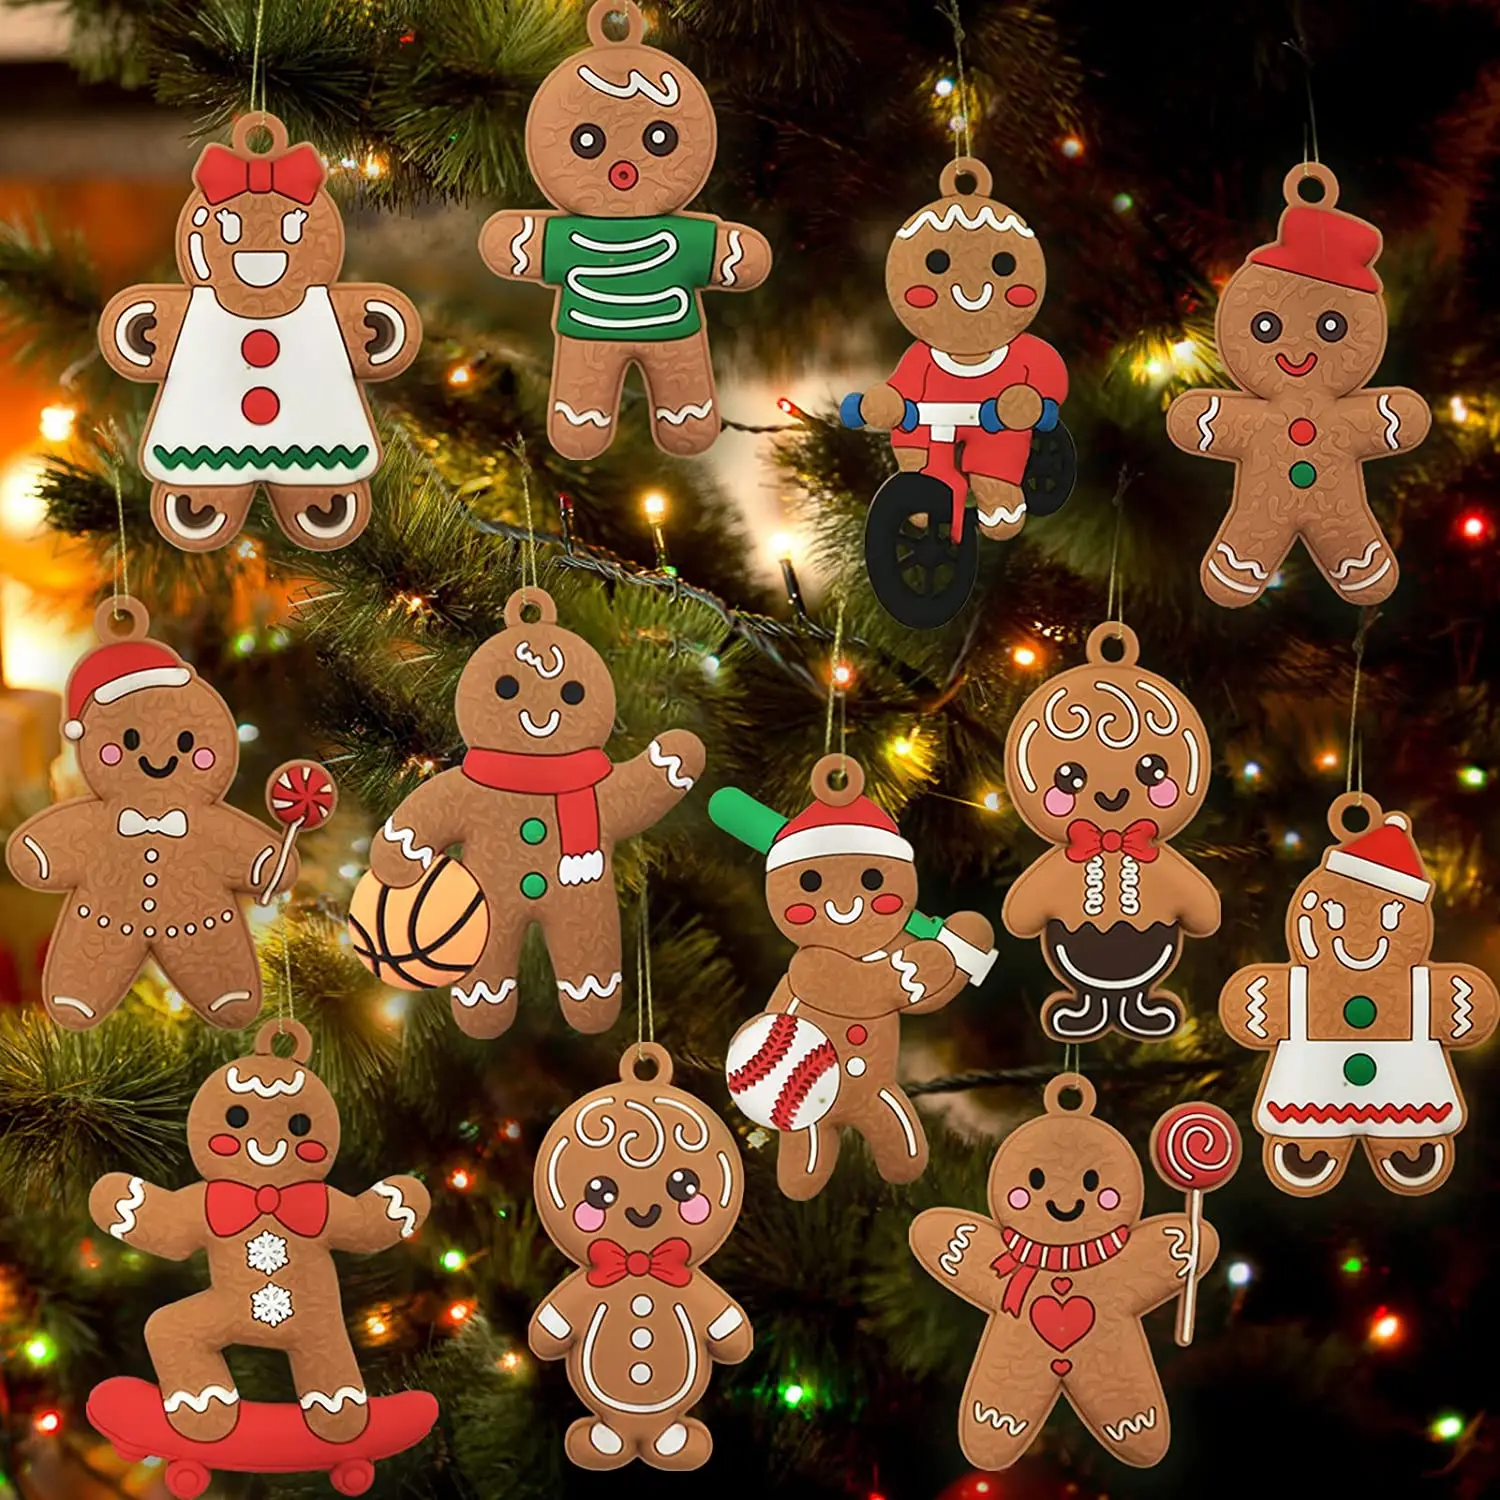 Twelve gingerbread men decorate Christmas tree figurines hanging 3 inches high